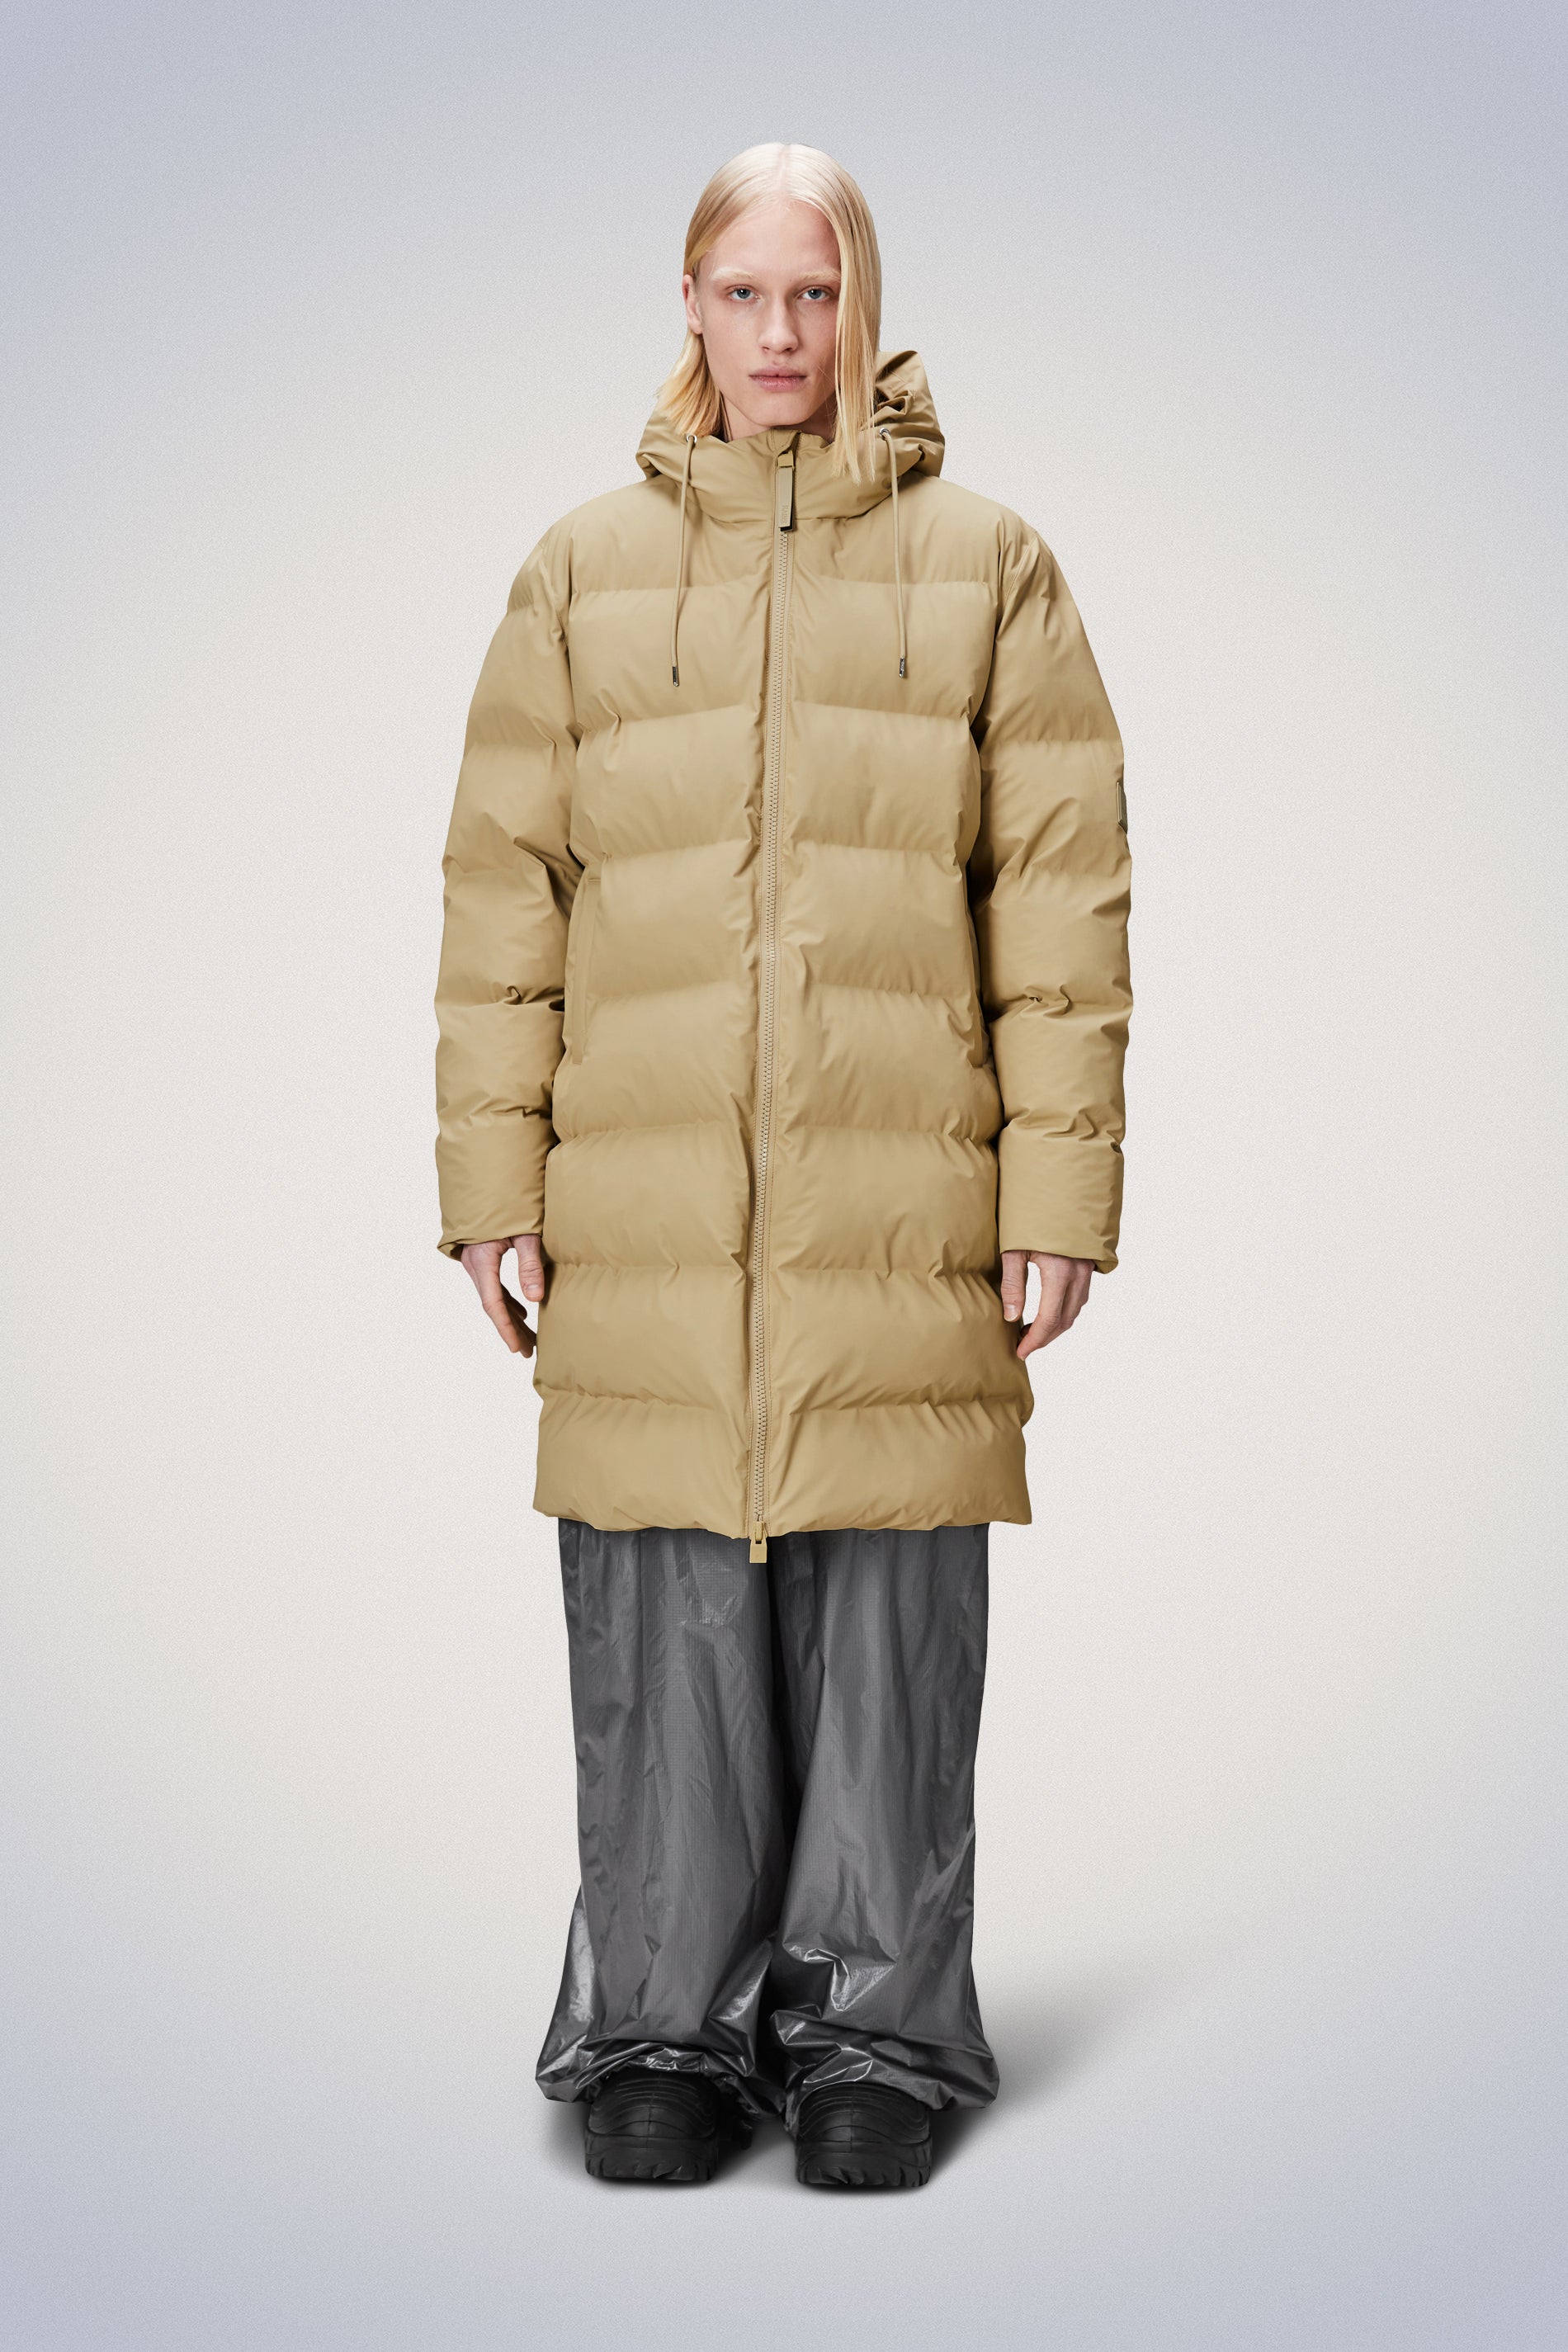 Rains® Alta Puffer Jacket in Sand for $430